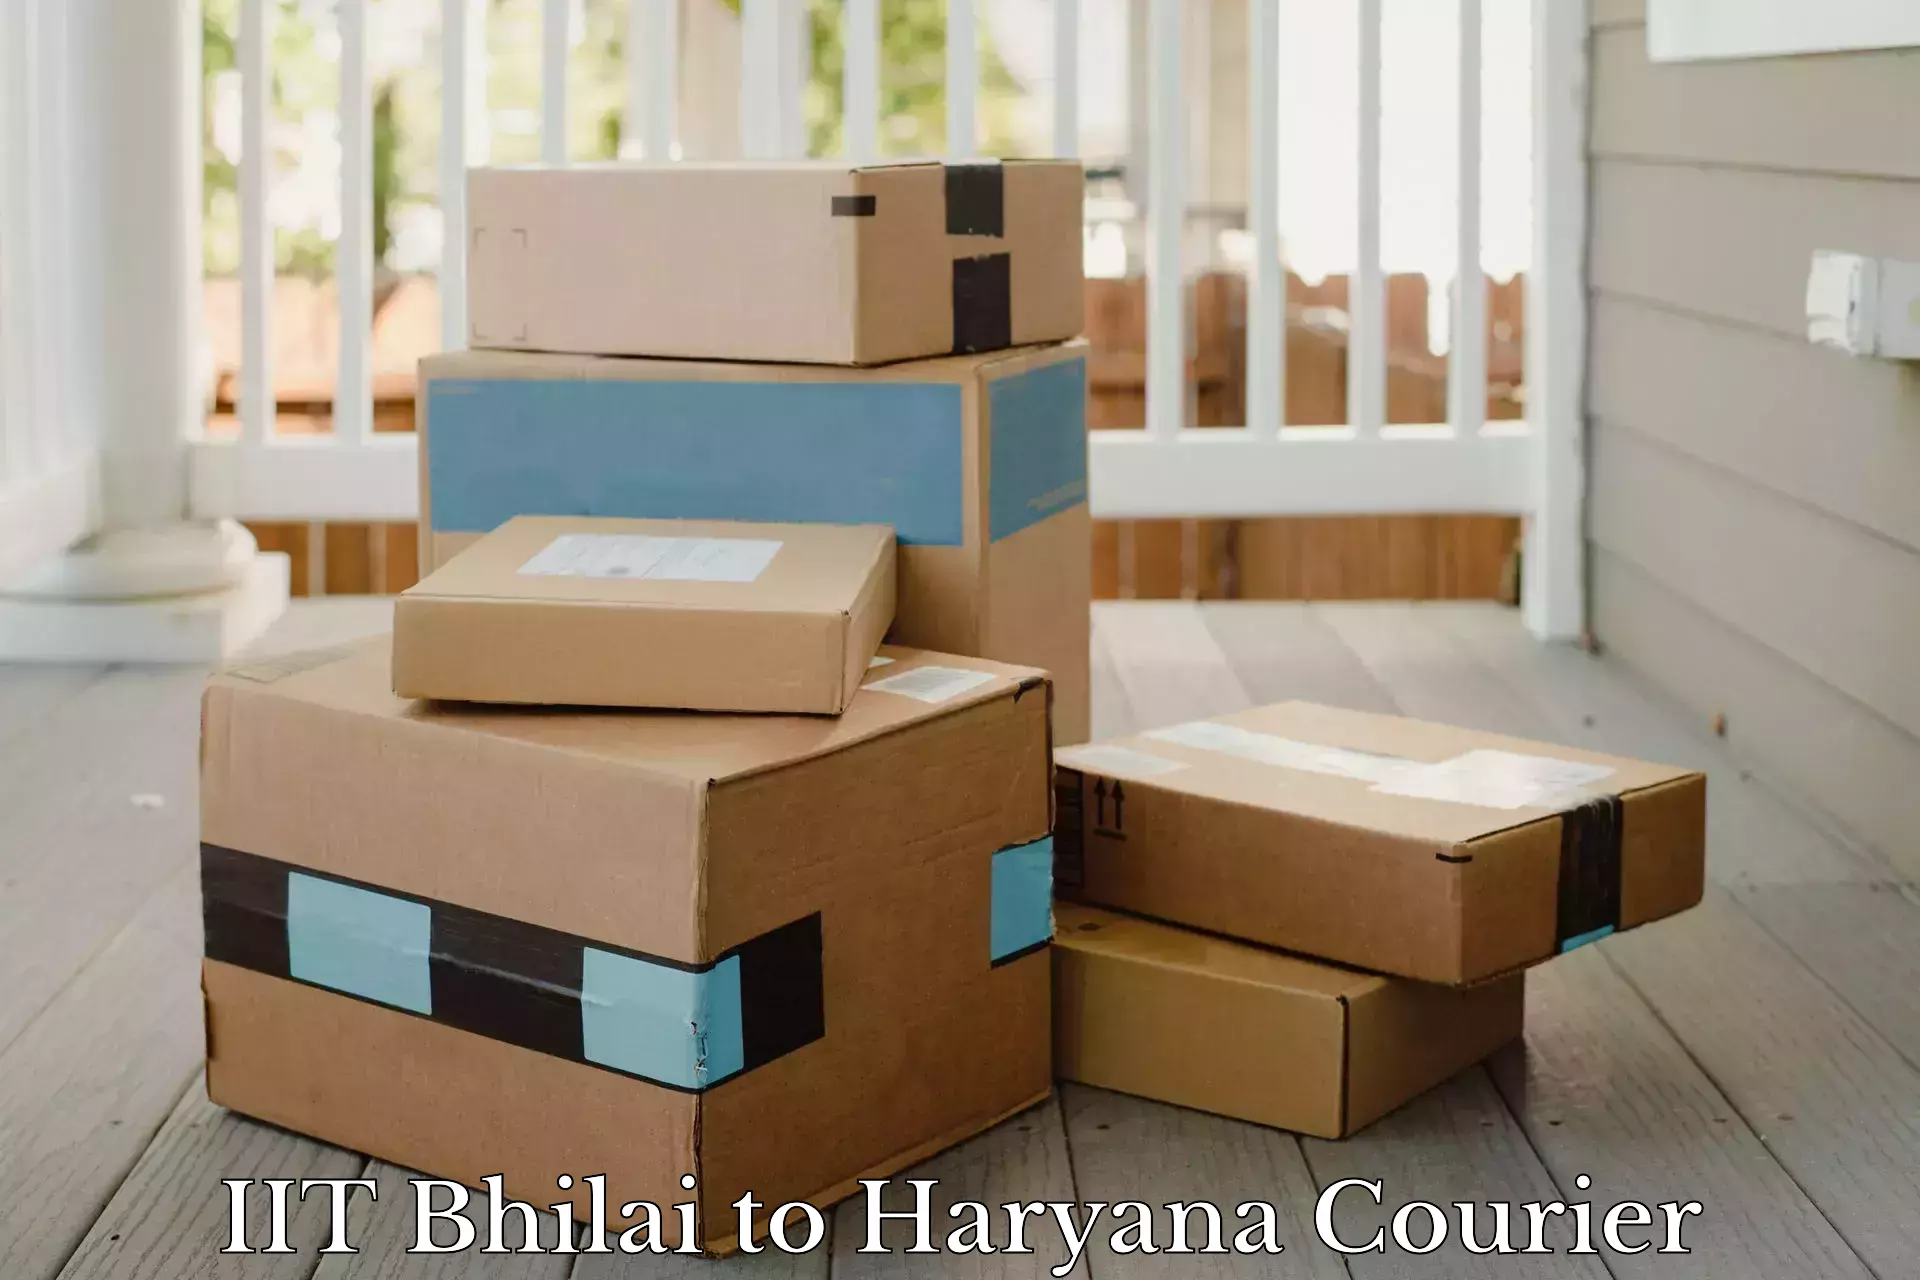 Nationwide courier service IIT Bhilai to Meham